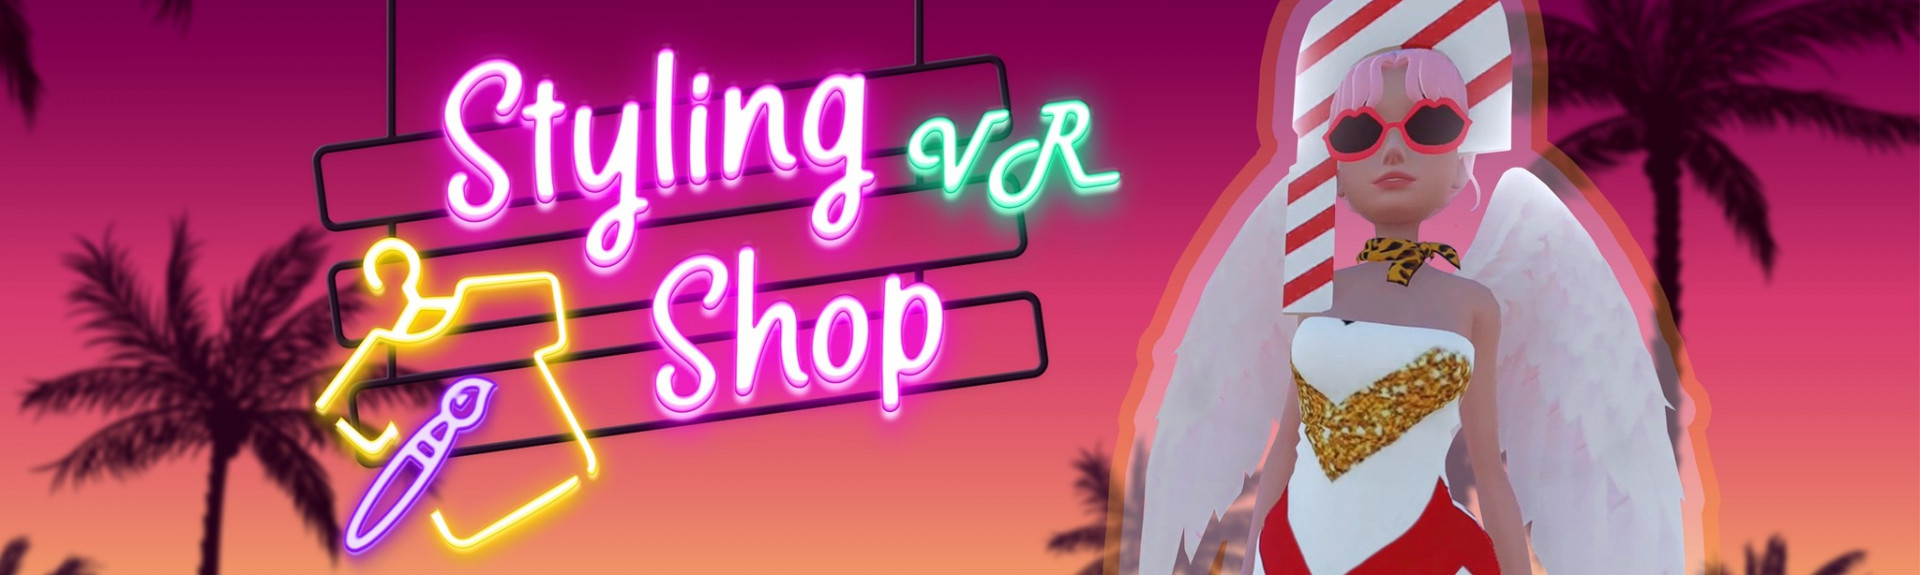 Stying Shop VR  Early Access